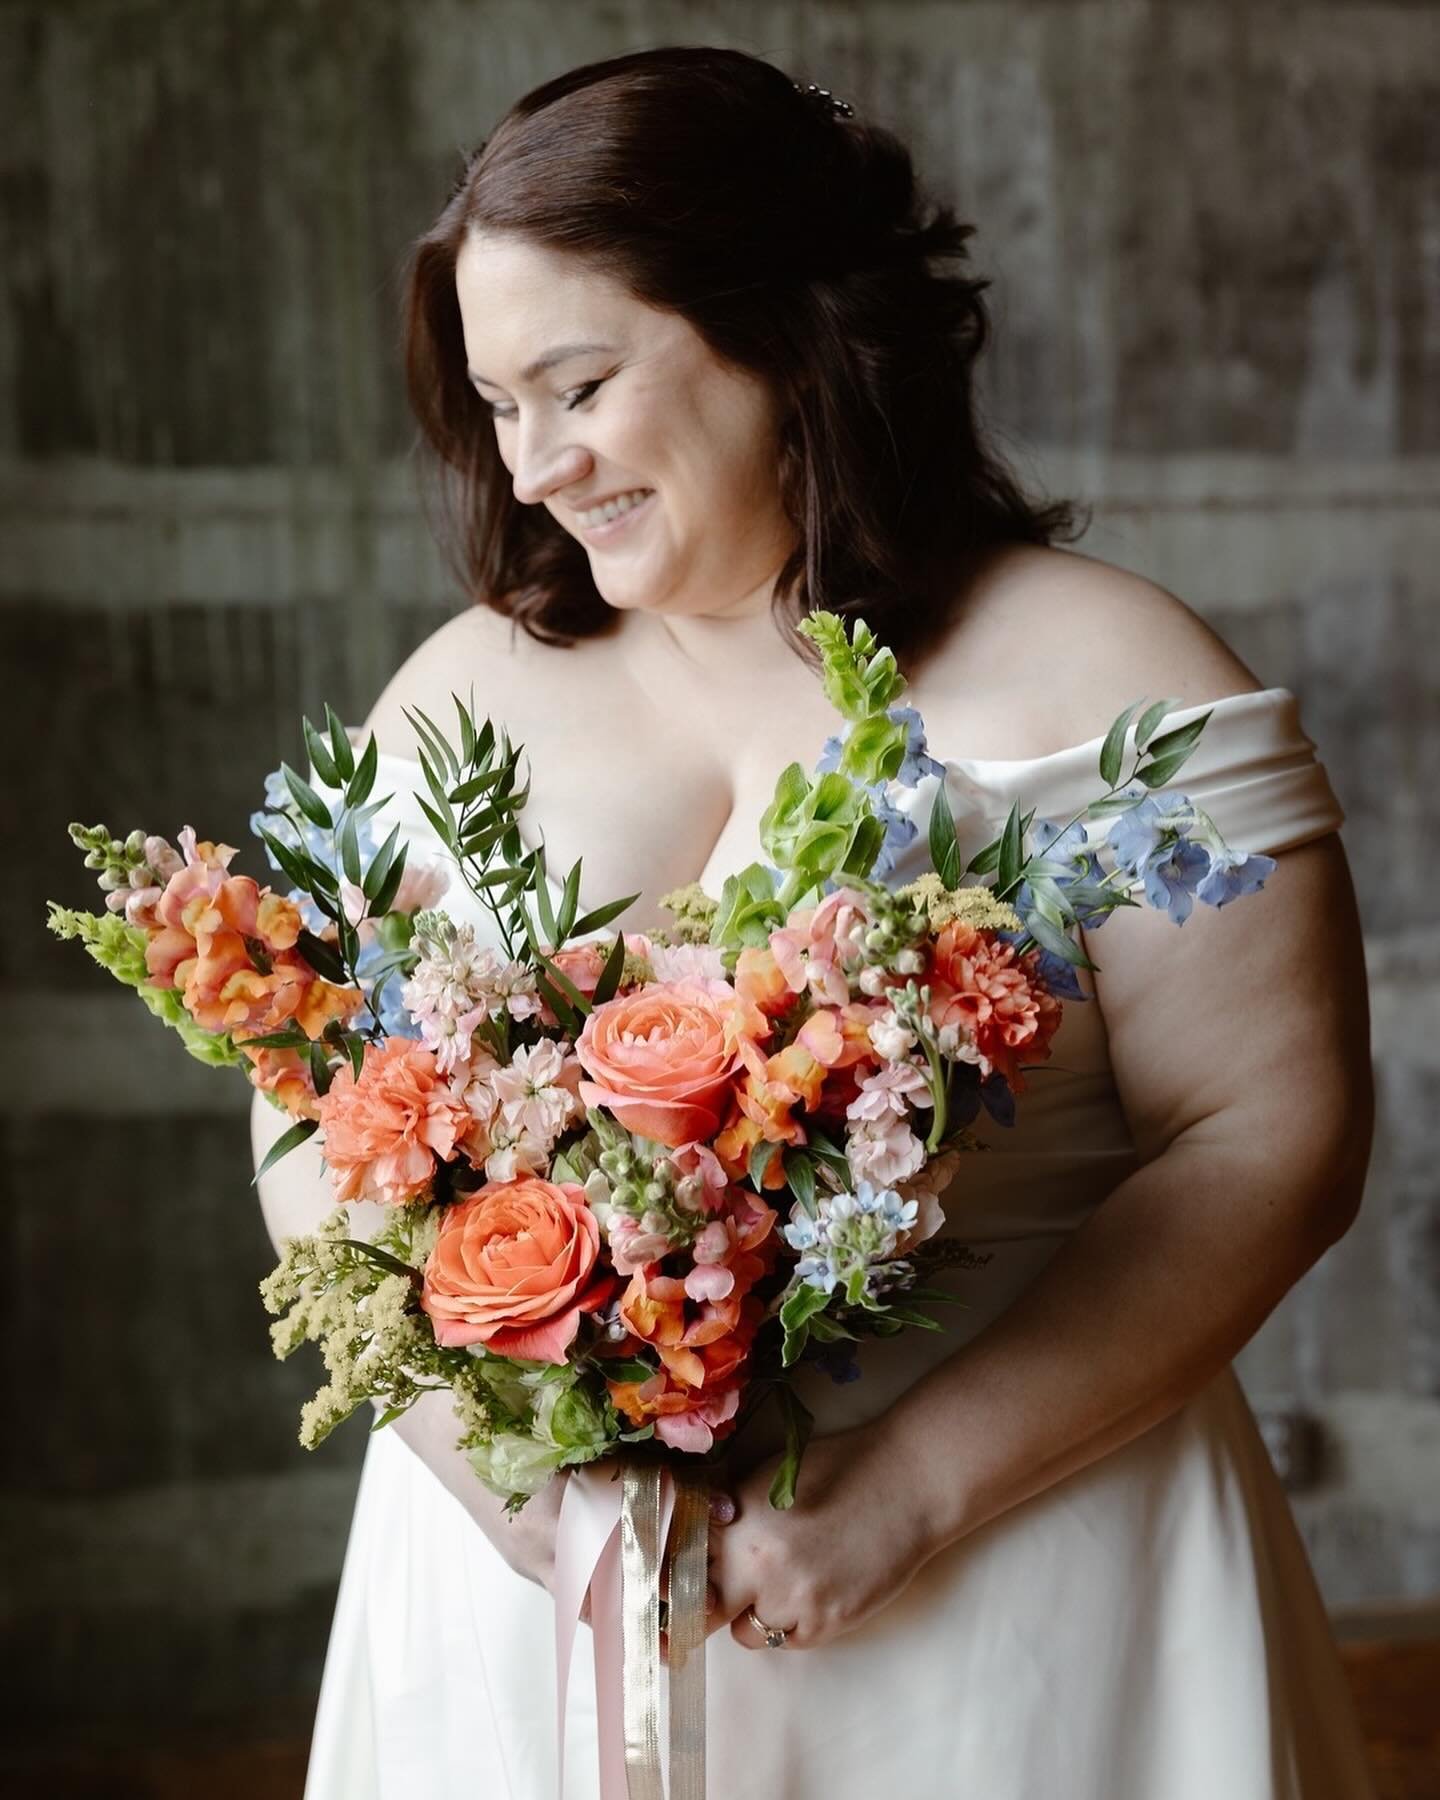 A reminder that your wedding can be industrial, chic, editorial, minimalist, or modern and you can ✨STILL✨ have colorful, vibrant flowers. 
⠀⠀⠀⠀⠀⠀⠀⠀⠀
I still have some dates left in early July and most of November if you are looking to bring more col